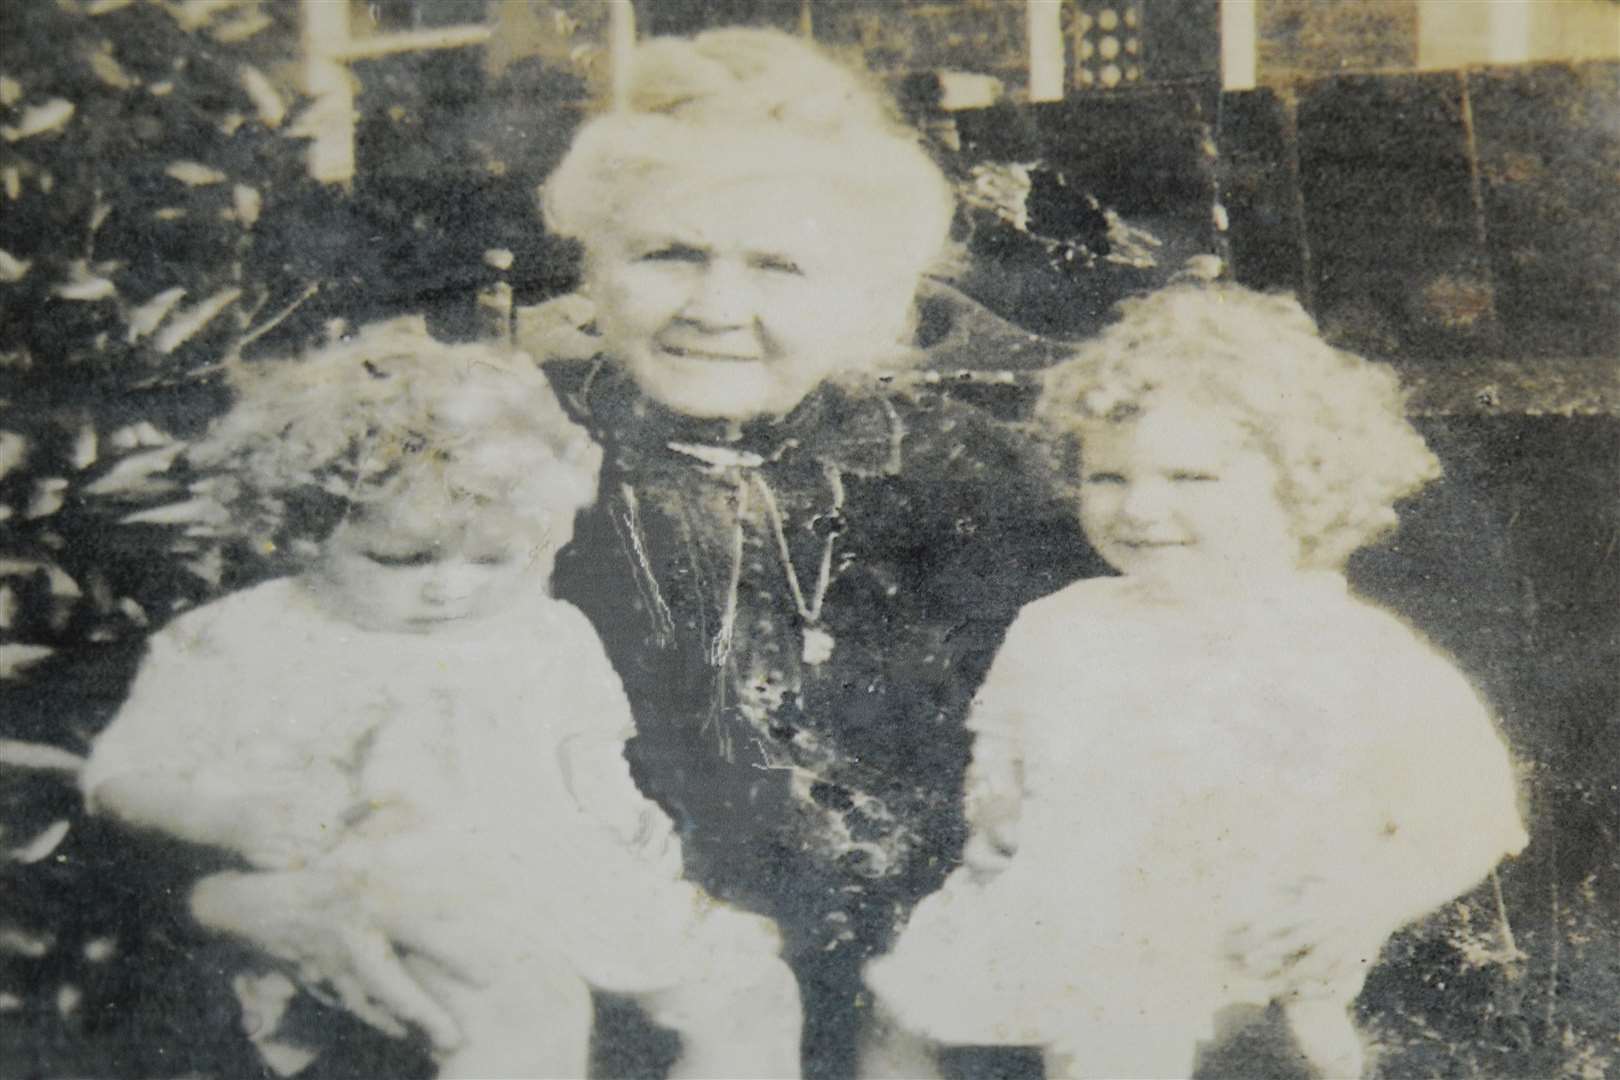 Identical twins Jackie and Jill with their grandma Bourne